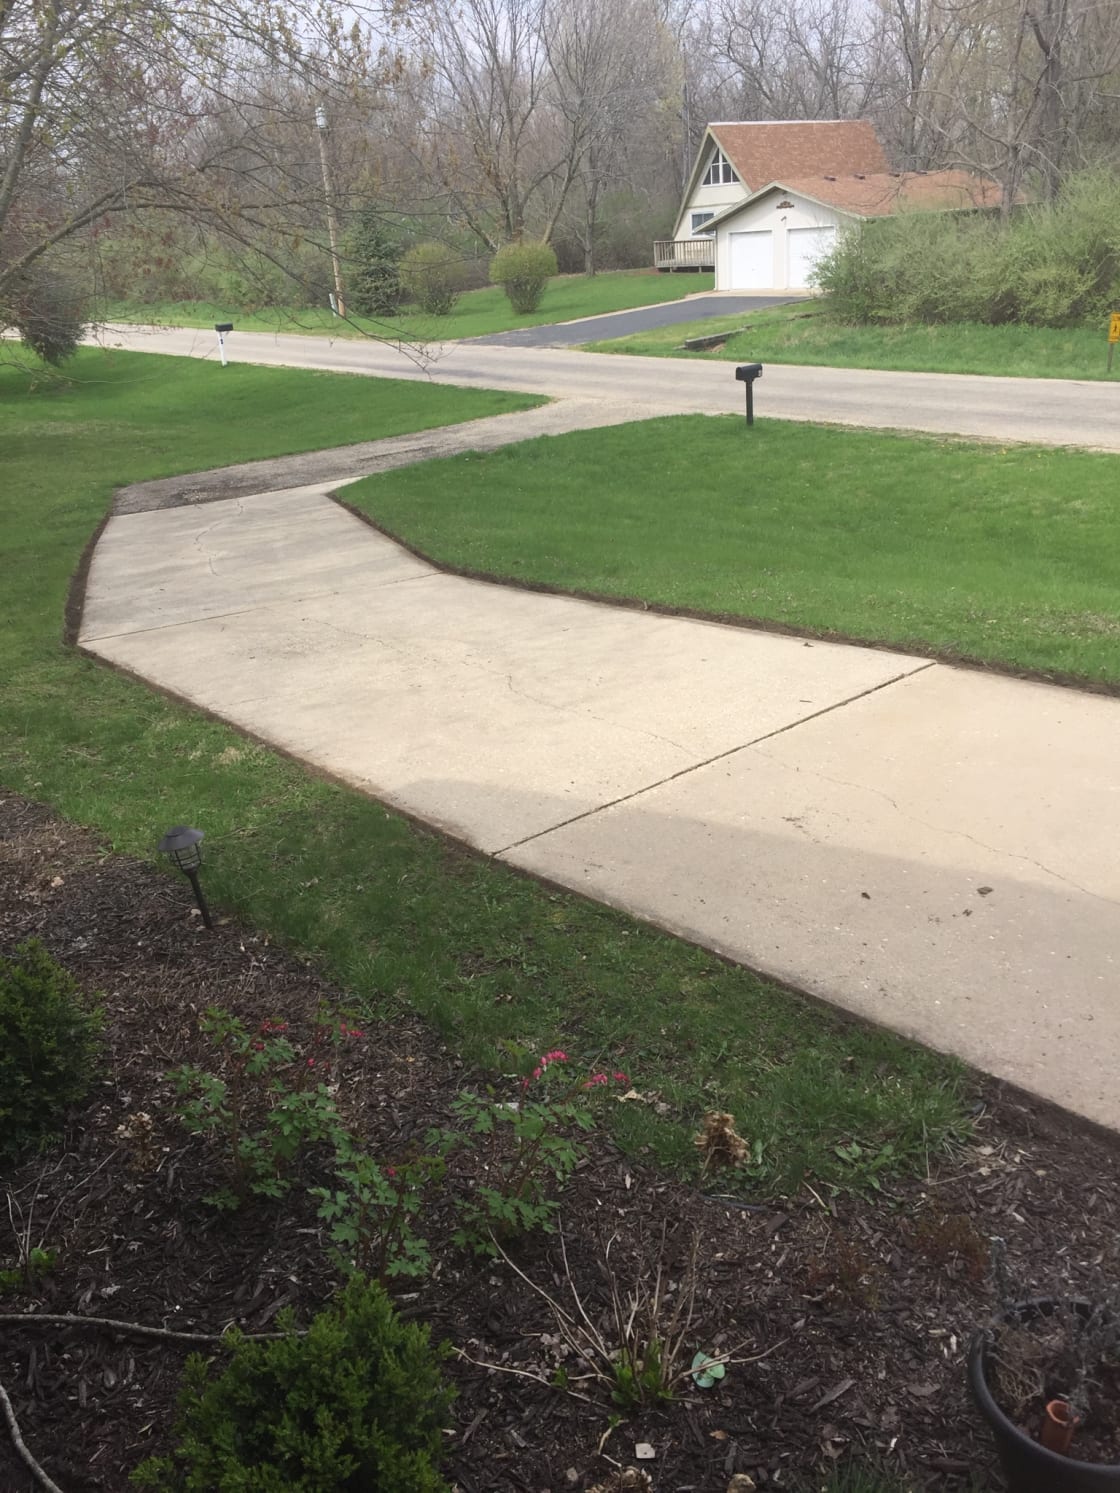 Sweeping concrete driveway runs in front of home for extra cars